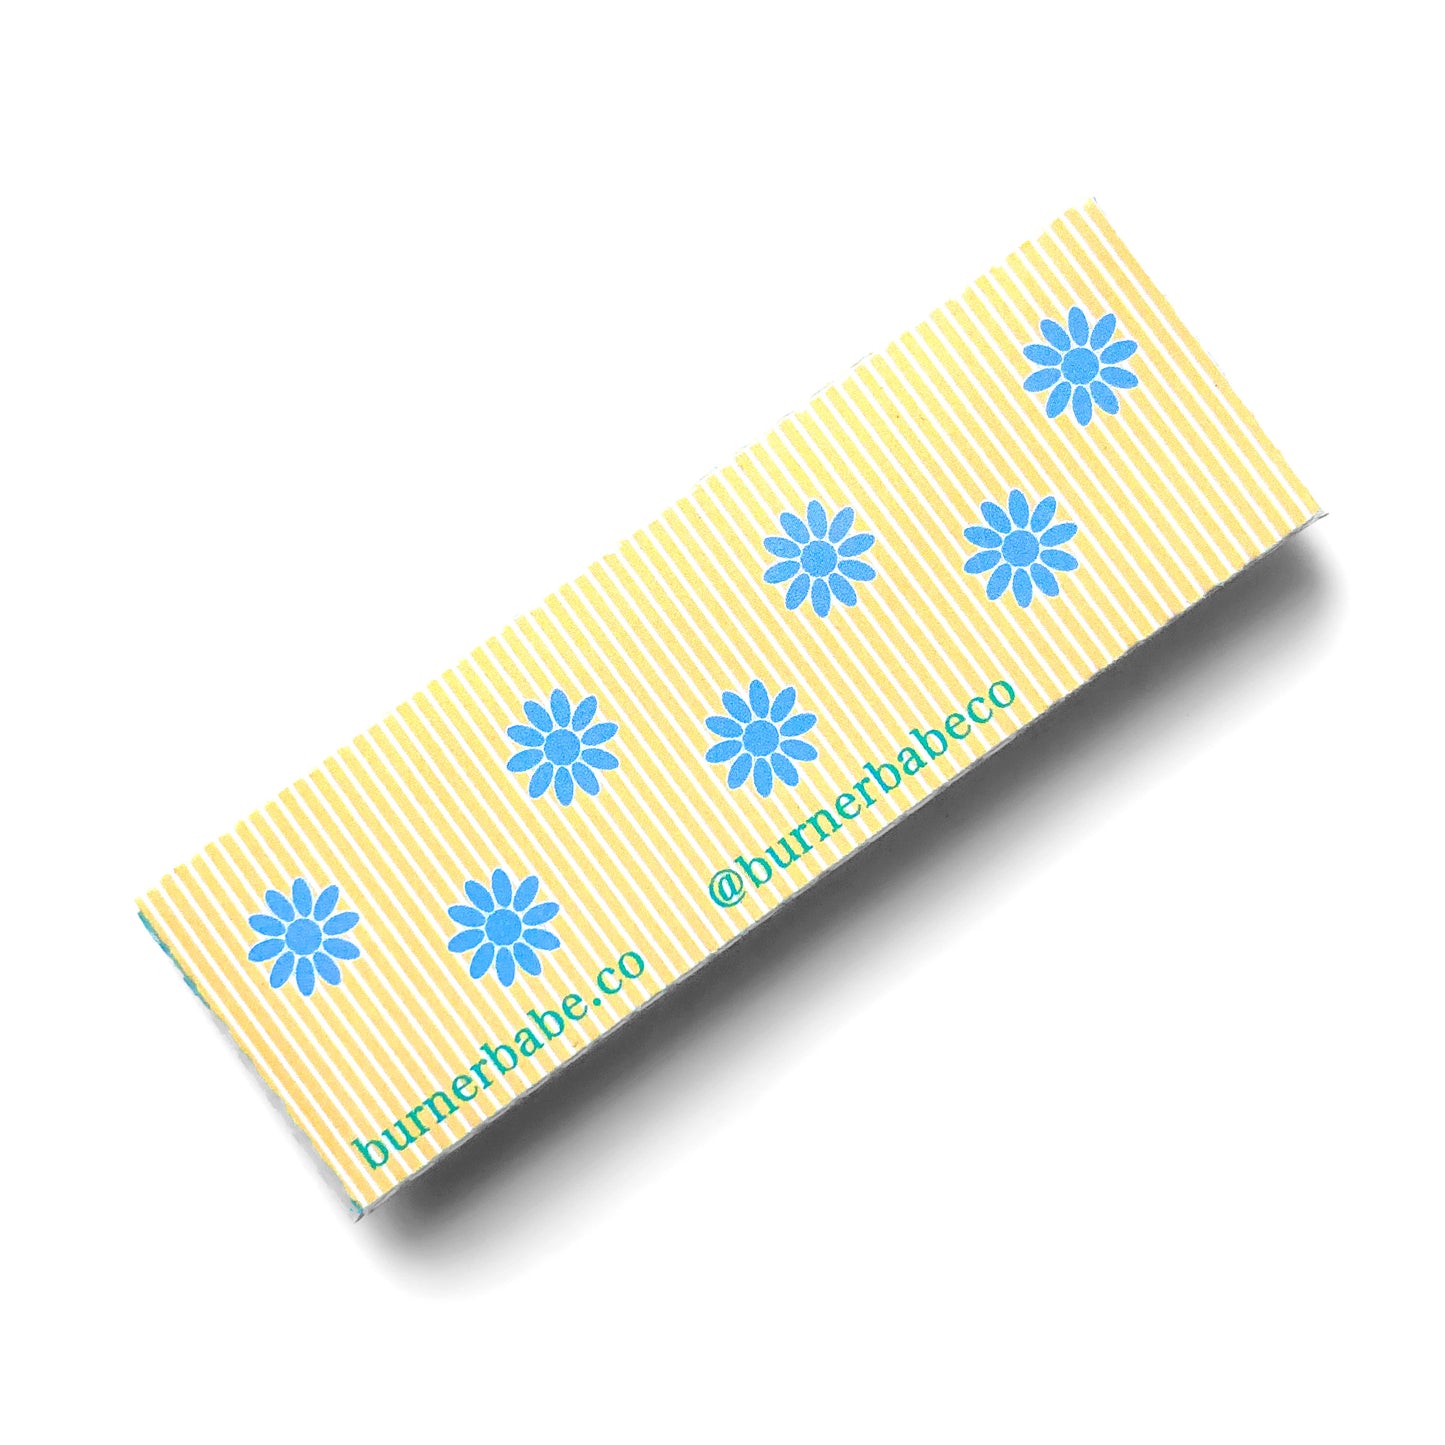 The Heartbreaker Papers: colorful spiral printed rolling papers. These designer rolling papers are girly, pretty, vegan, cute, cool, standard size, high quality, even burn, natural dyes, best tasting, slow burn.